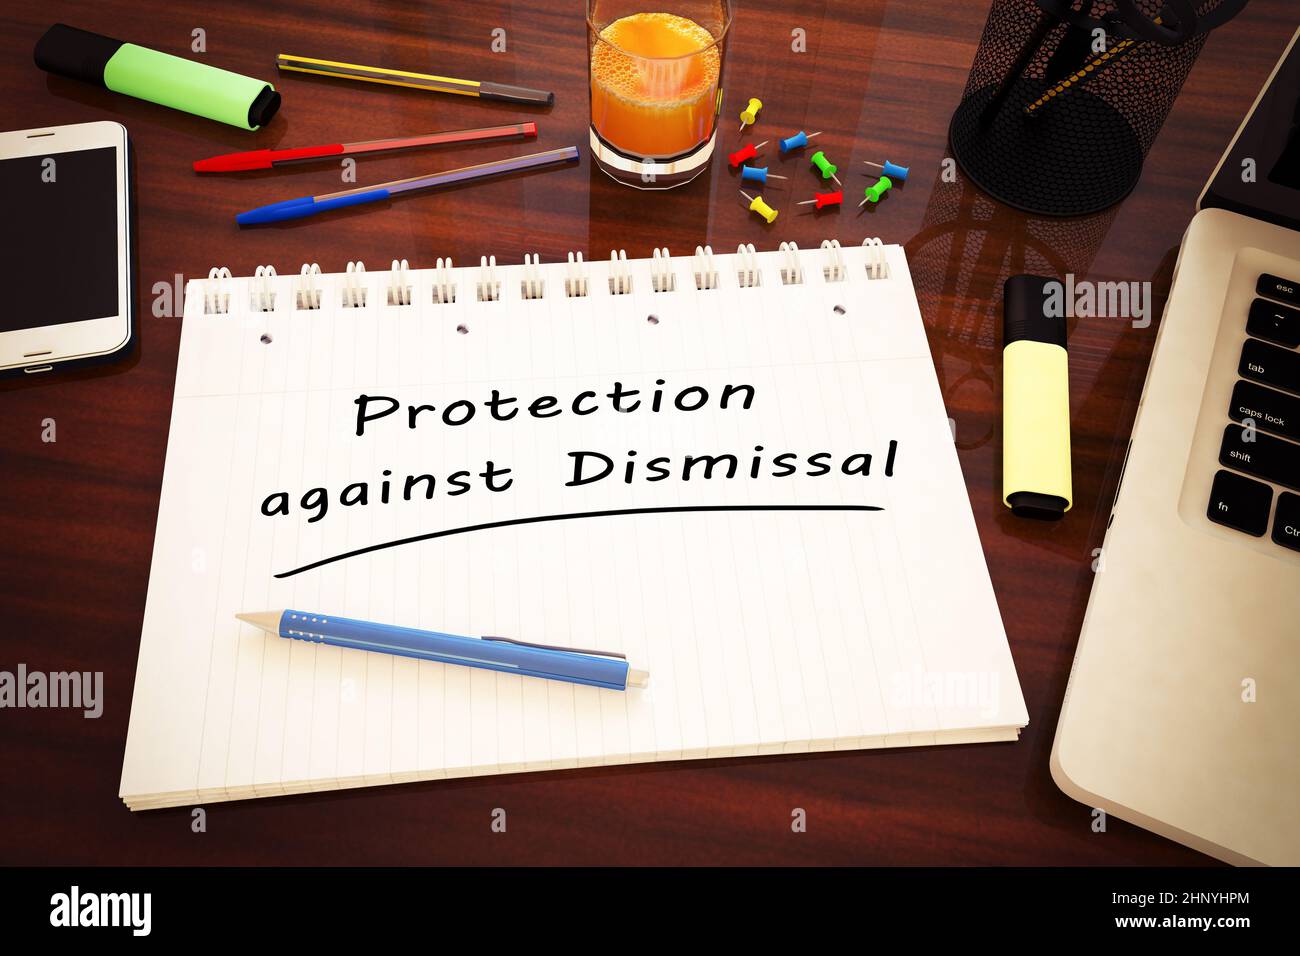 Protection against Dismissal - handwritten text in a notebook on a desk - 3d render illustration. Stock Photo